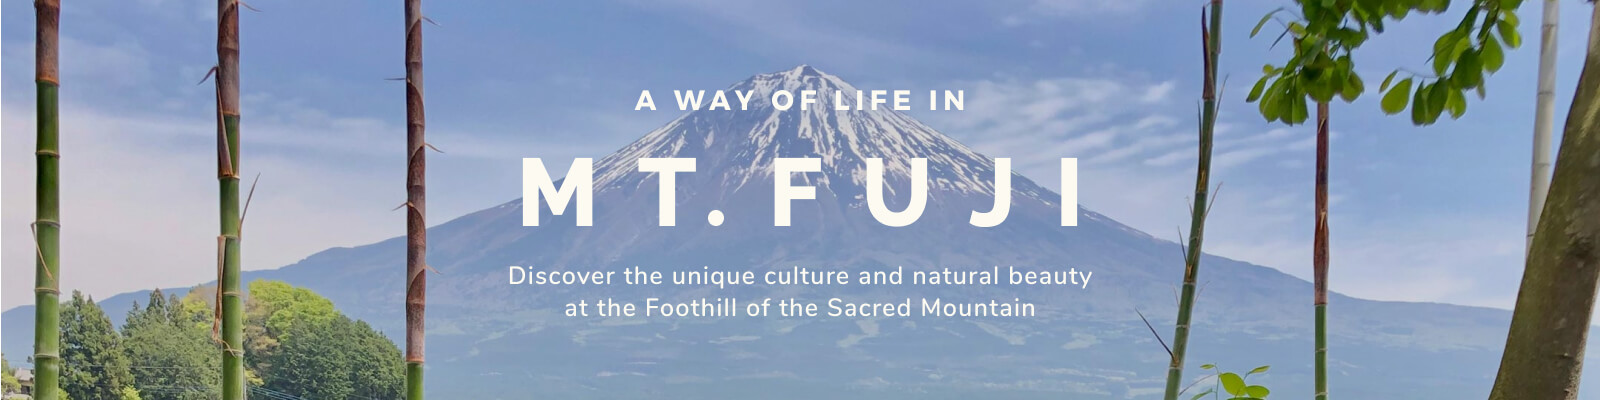 Discover the Unique Culture and Natural Beauty at the Foothill of the Sacred Mountain